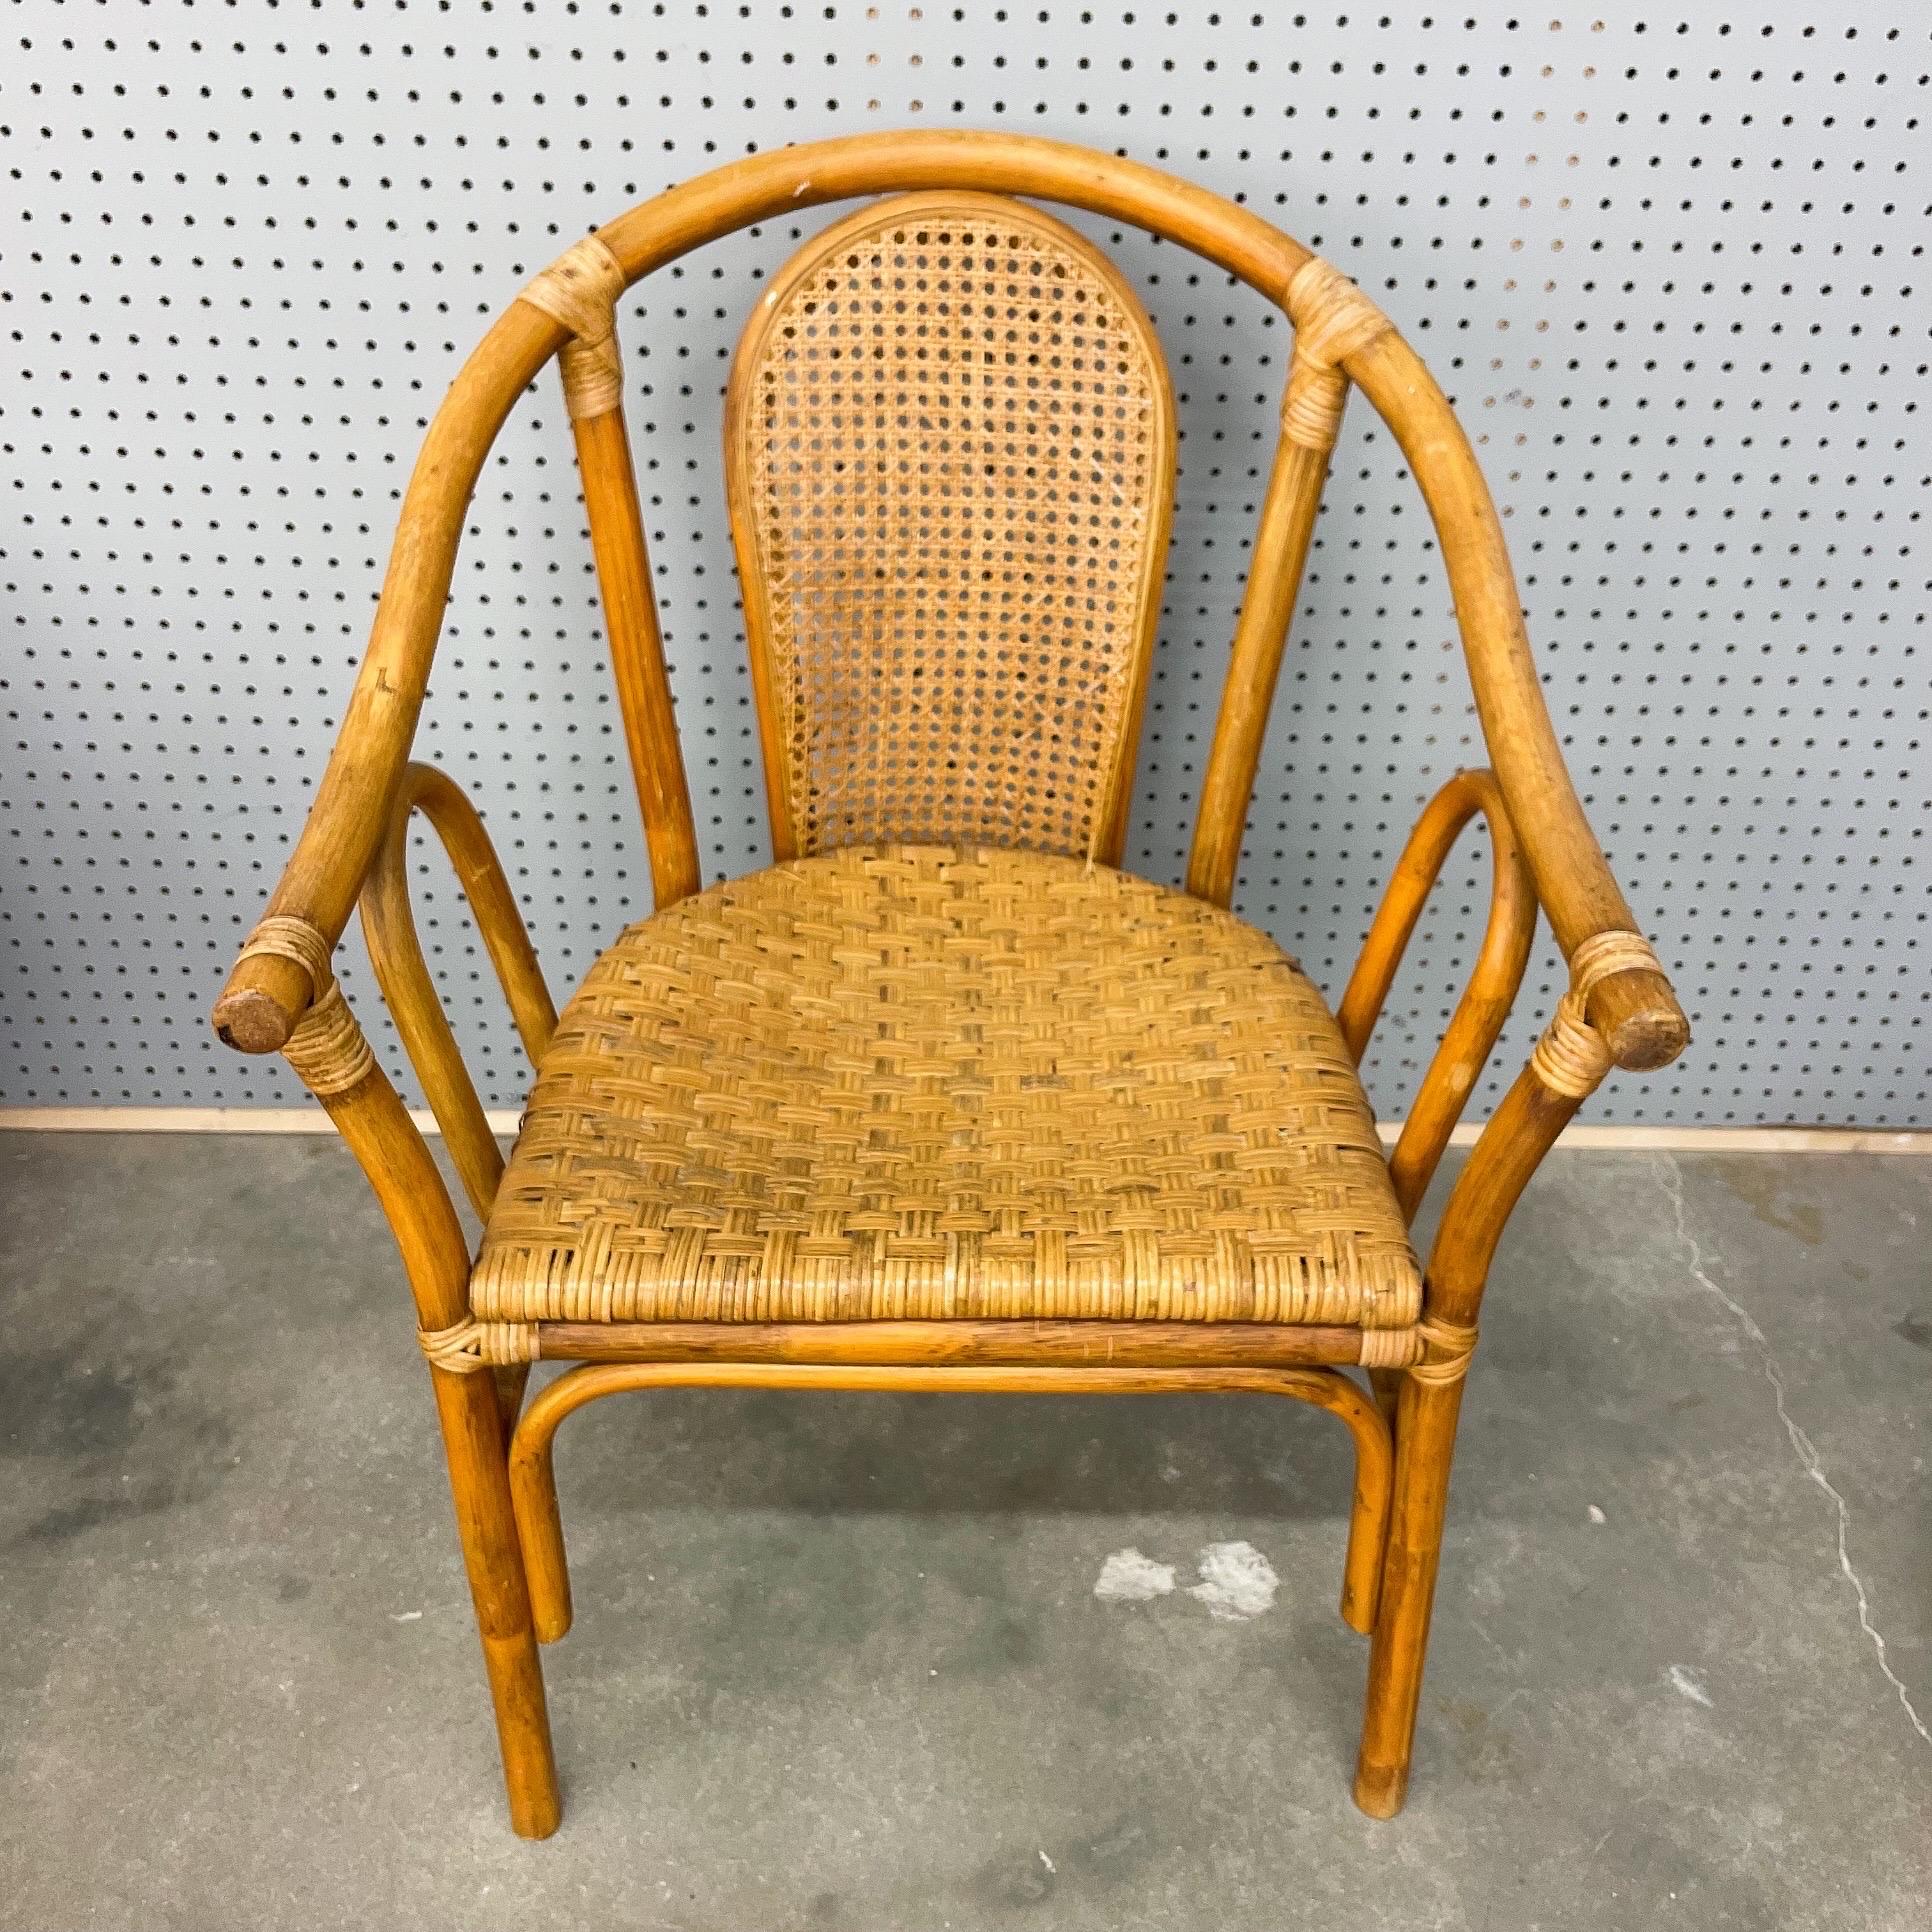 Set of 4 rattan and bamboo barrel-shaped arm chairs feature bow back with cane insert and two-toned finish. Very good condition with minor imperfections consistent with age.